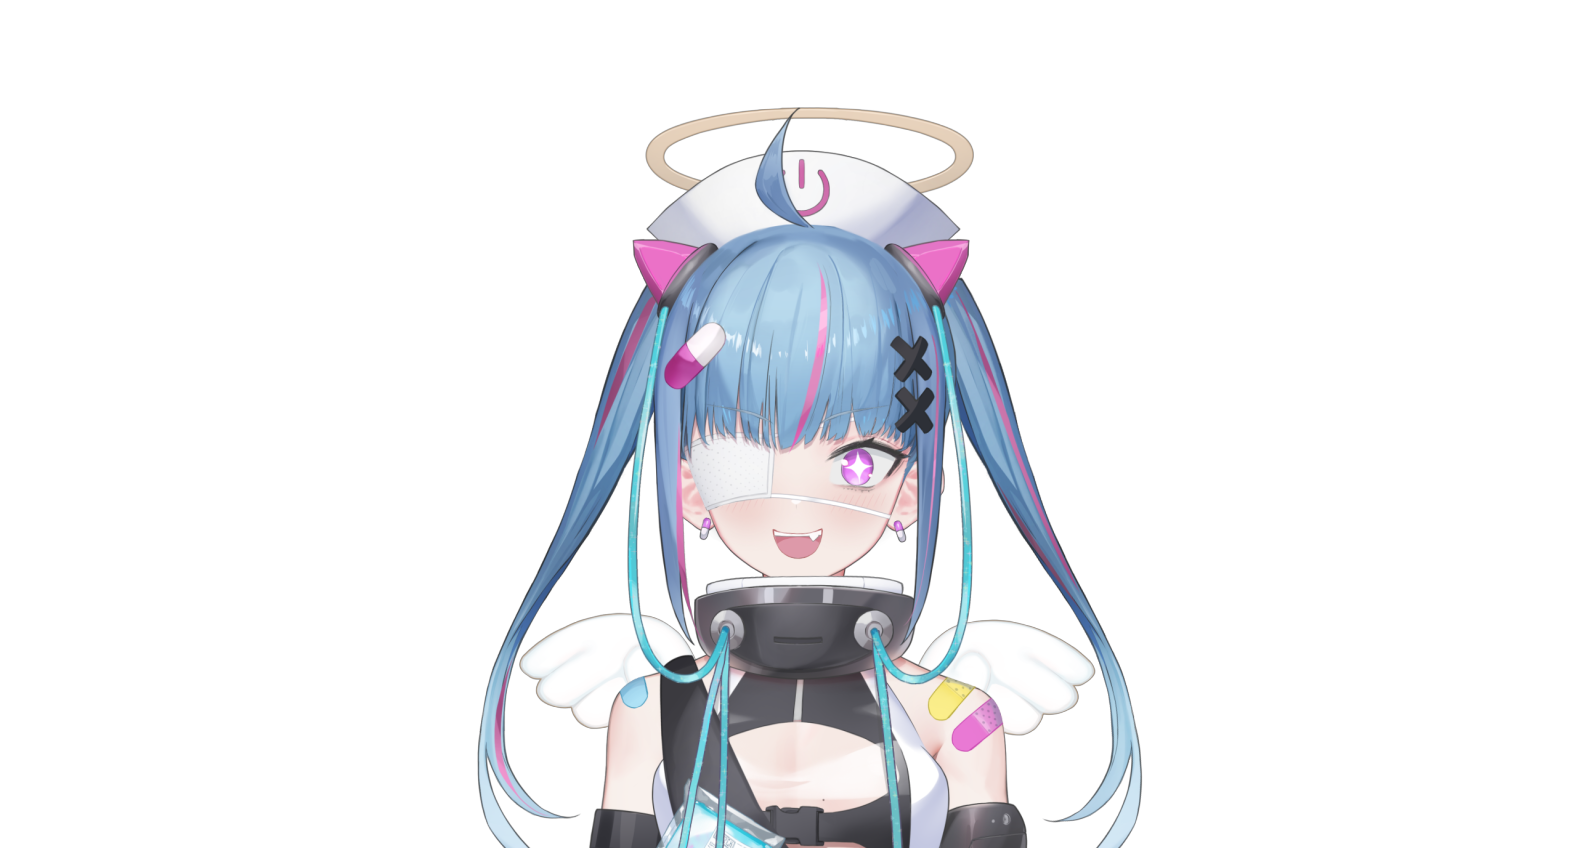 a digital tenshi with a medical eyepatch and a pink eye with a pink + instead of a pupil. she has a cute fang. it's really cute. chuuni cute.